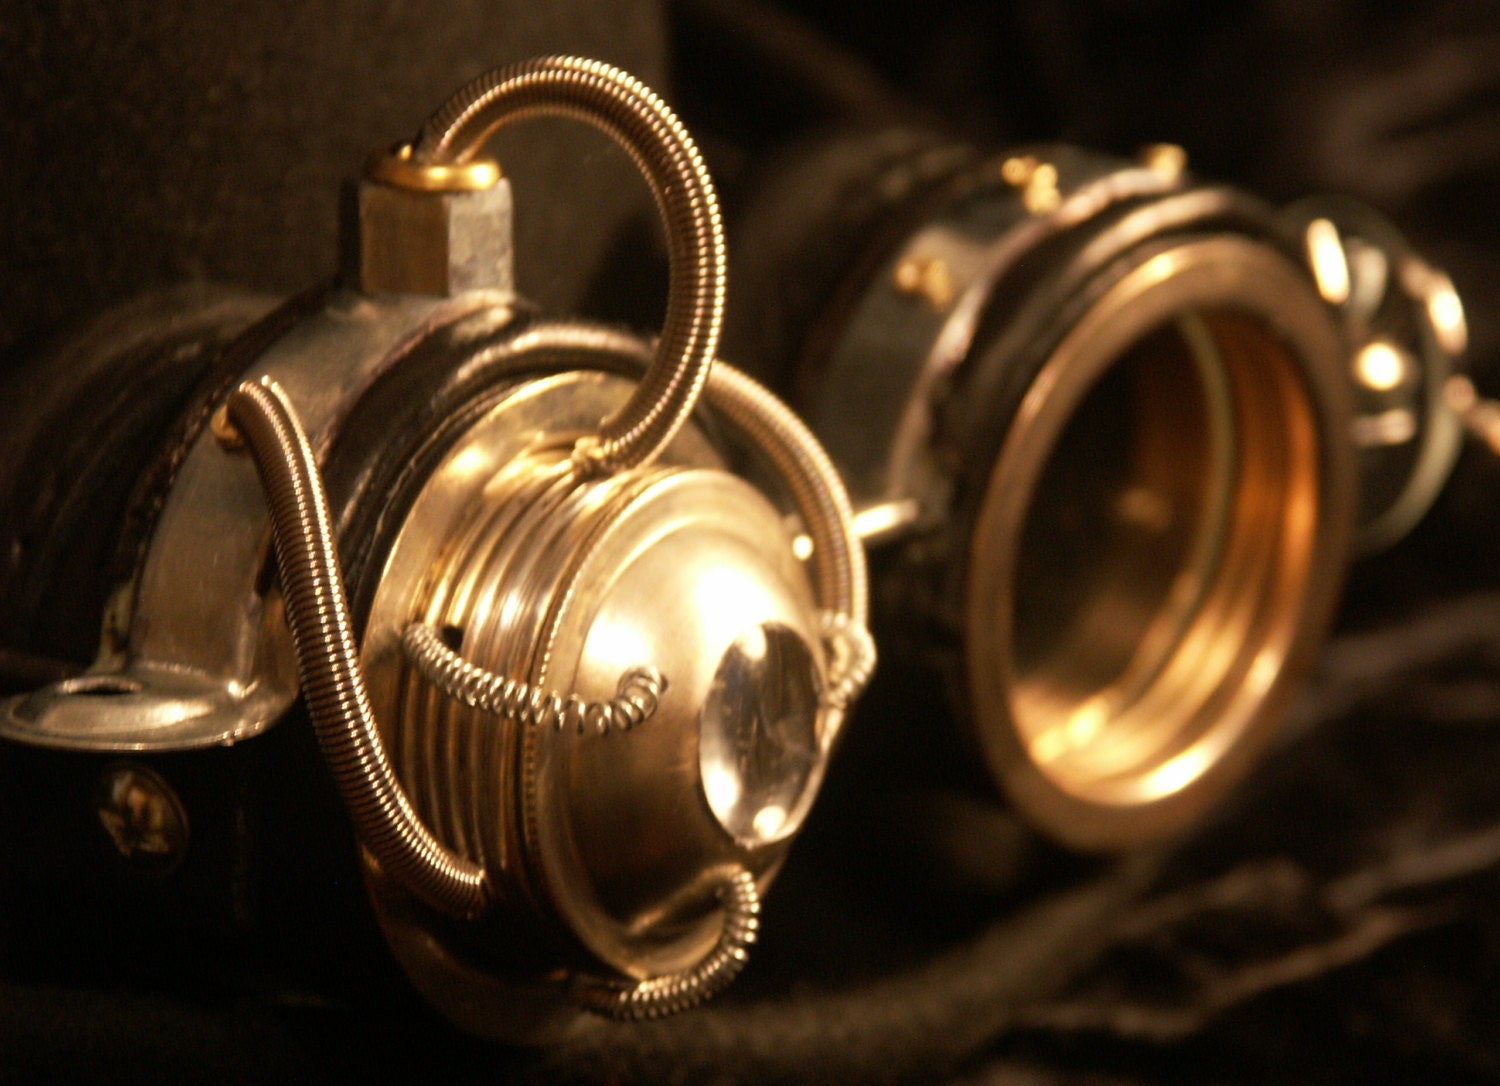 Steampunk goggles in black  leather and silver tone metal with moveable lens and monocle-style eyepiece. - TheTimeCabinet